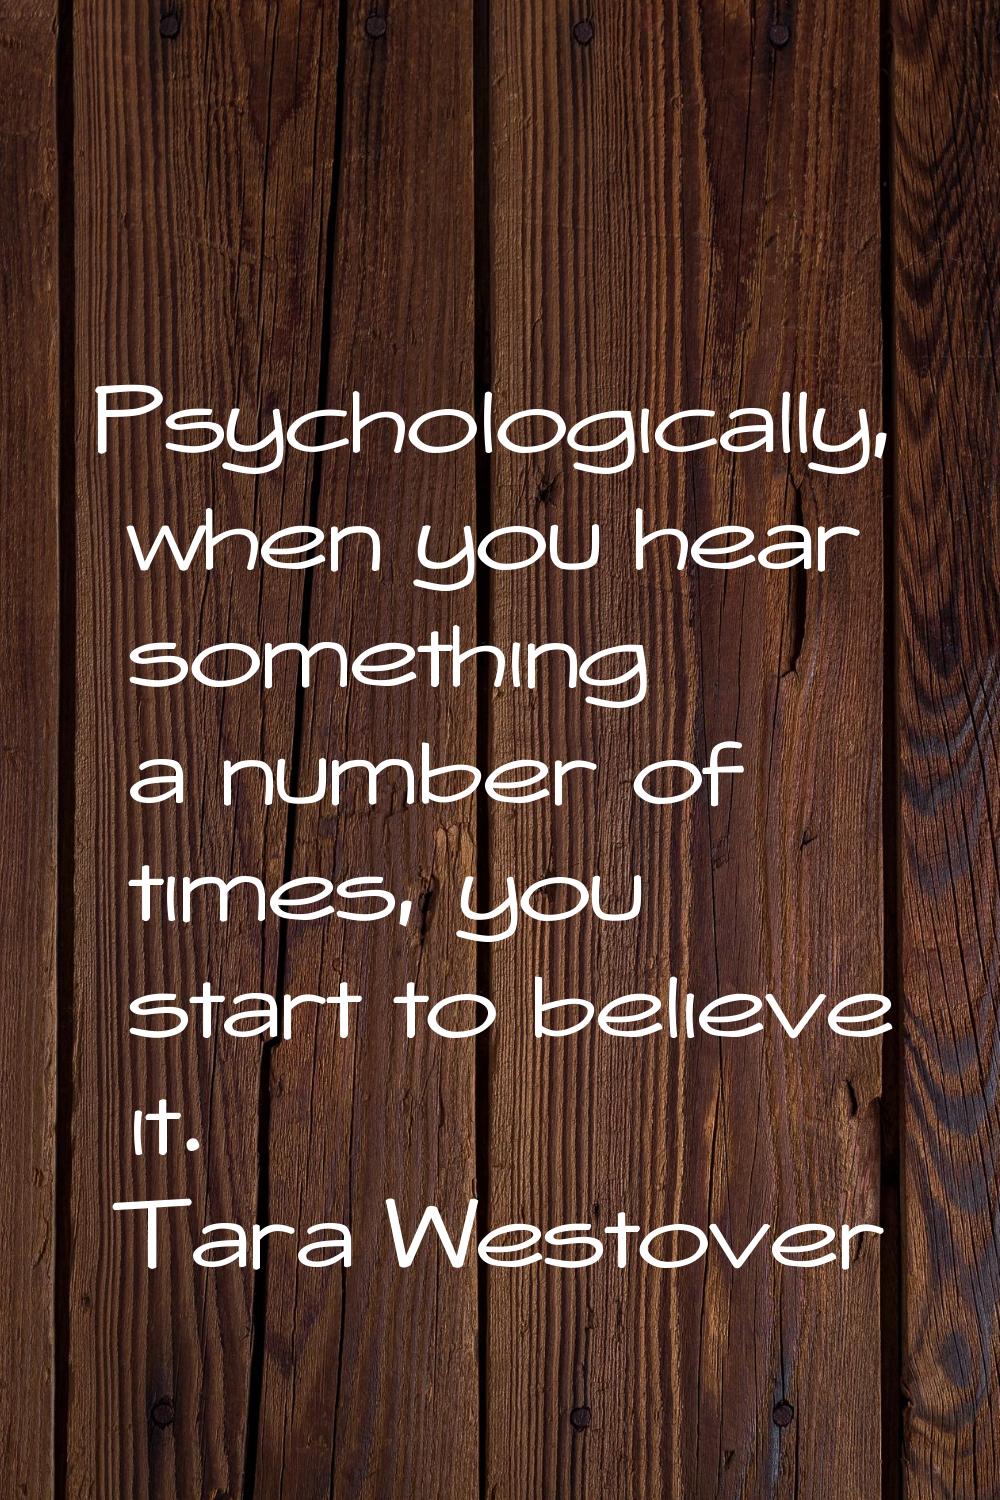 Psychologically, when you hear something a number of times, you start to believe it.